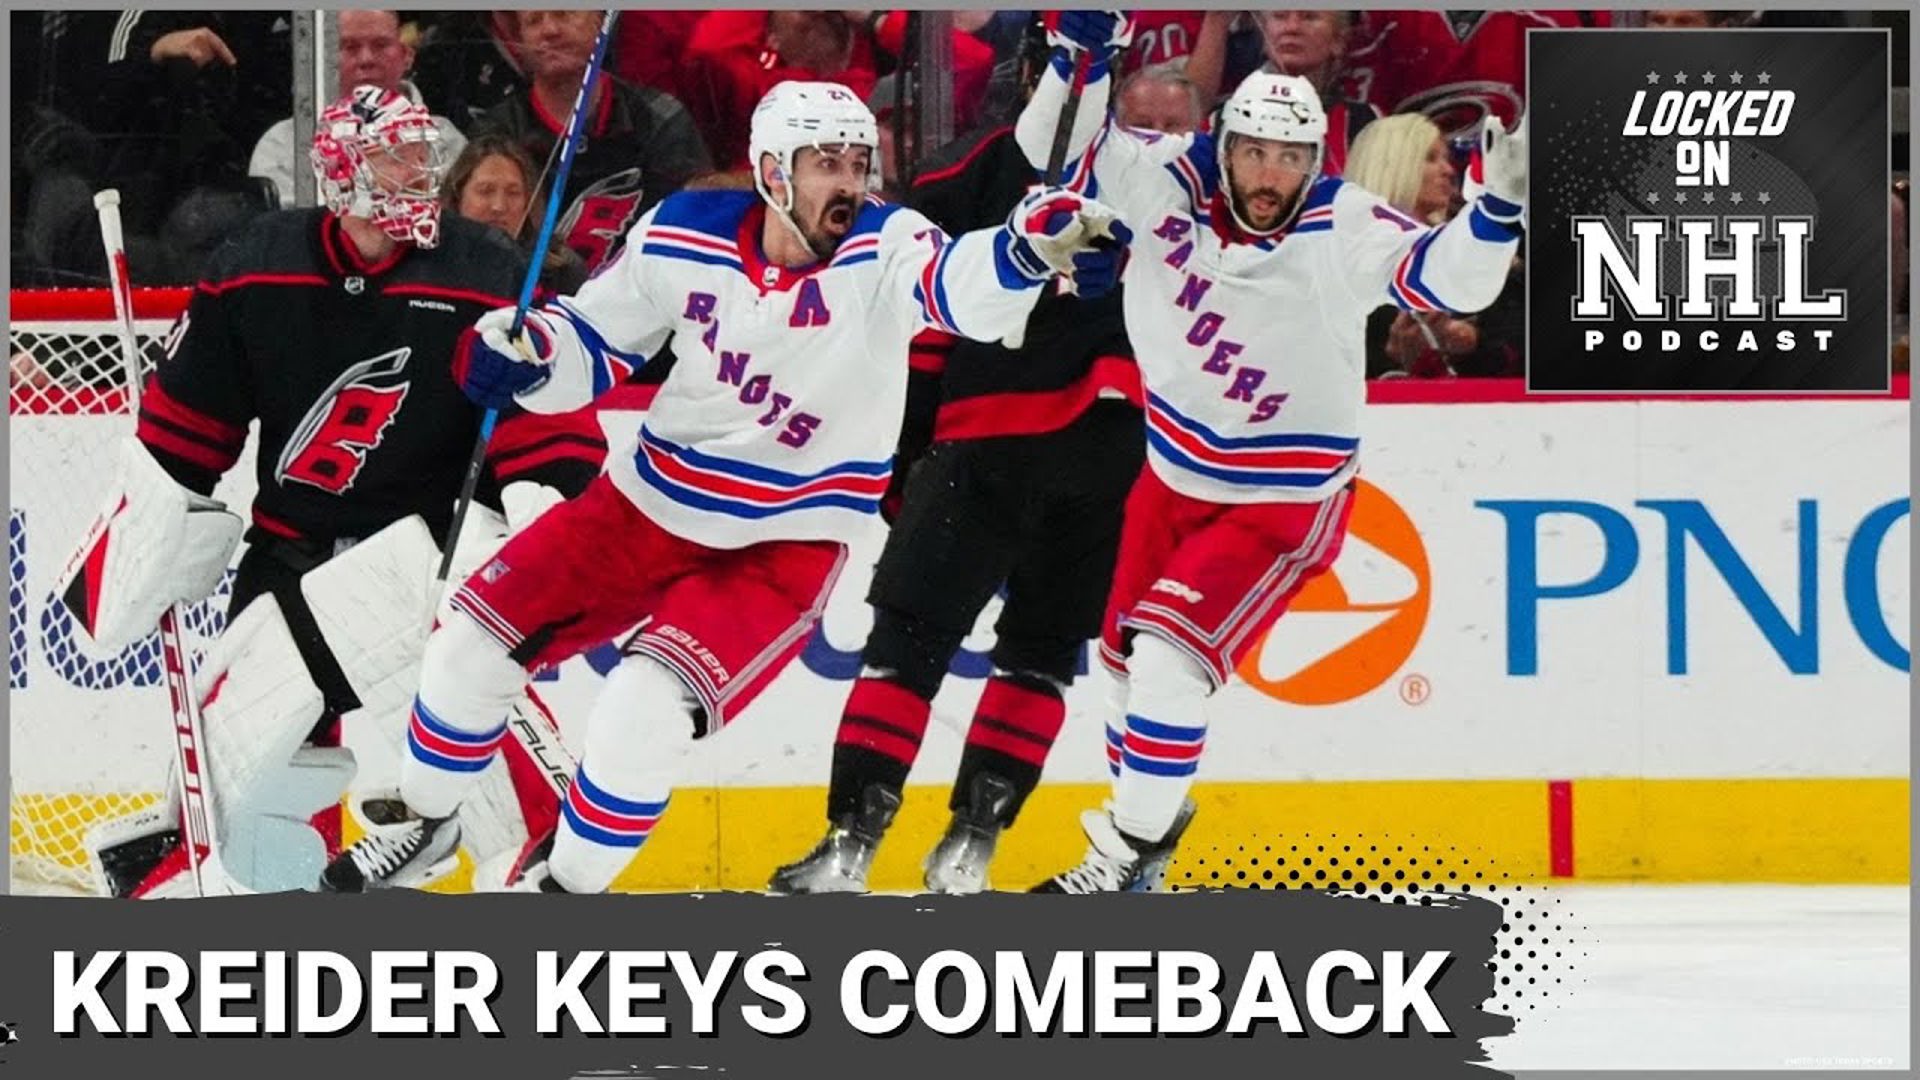 The New York Rangers became the first team to advance to the Conference Final as they scored a big comeback win to eliminate the Carolina Hurricanes.